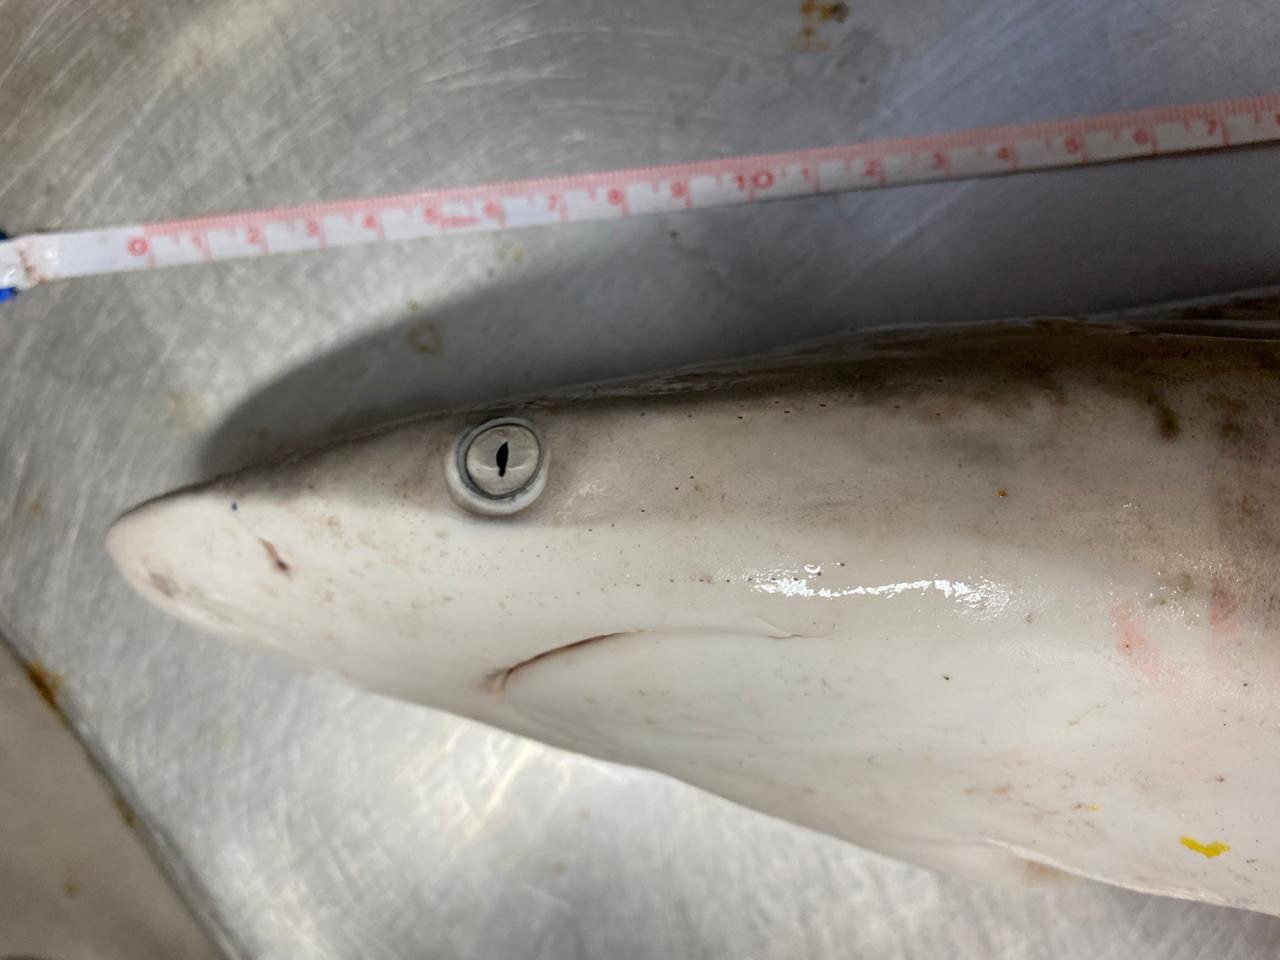 Wild sharks off the coast of Brazil have tested positive for cocaine, scientists say. Photo: Reuters